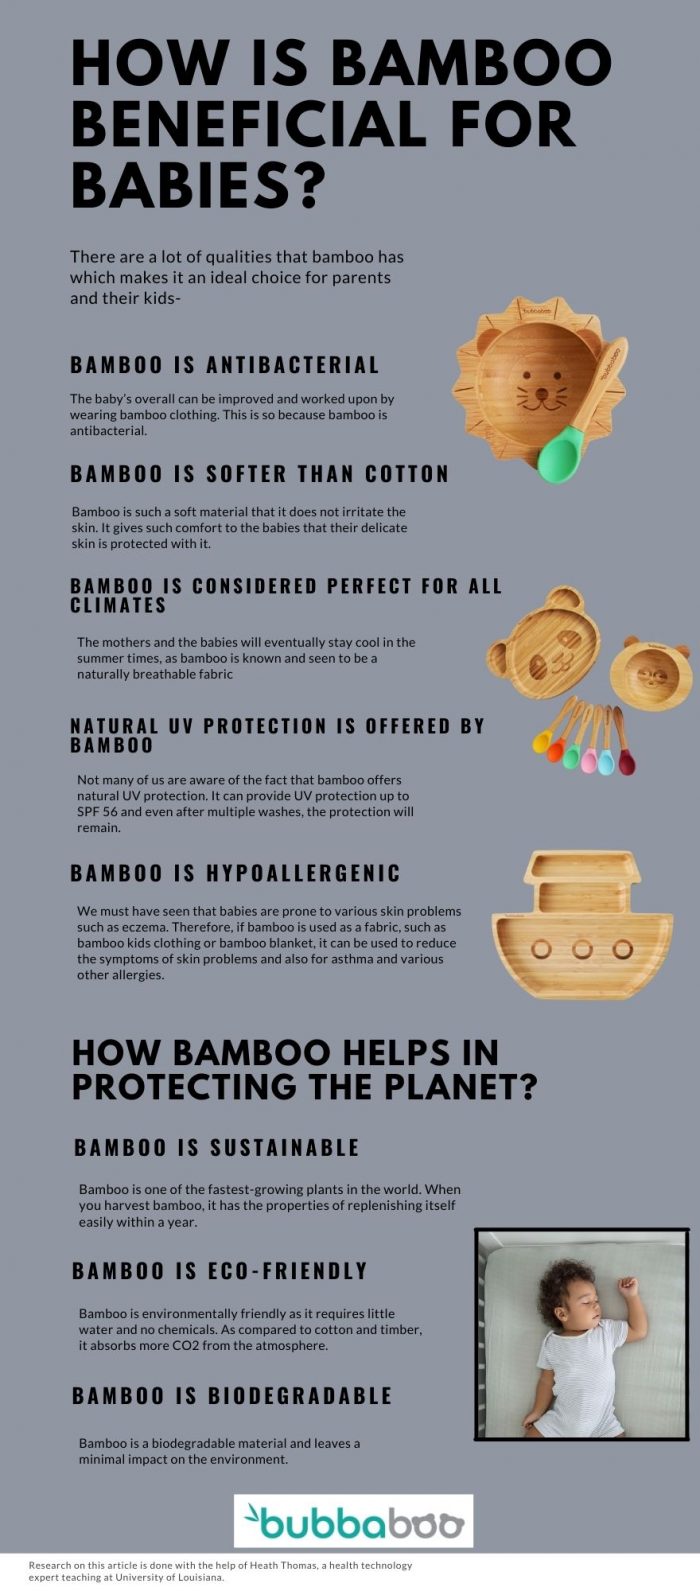 The benefits of Bamboo for You, Baby and the Planet